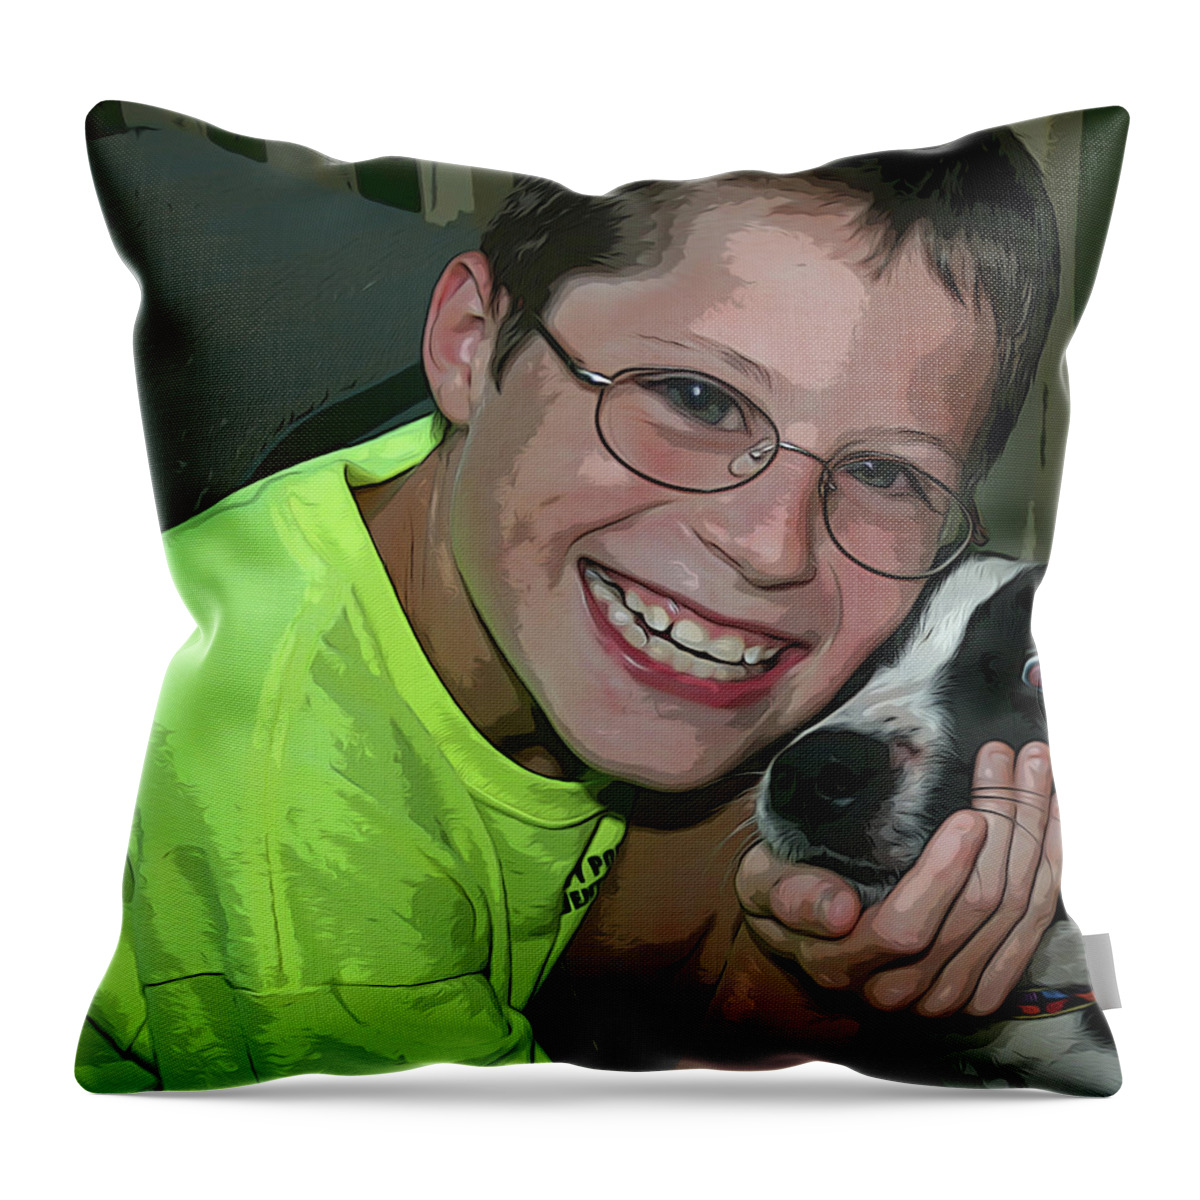 Boy Throw Pillow featuring the digital art For The Love of a Dog by Cathy Harper